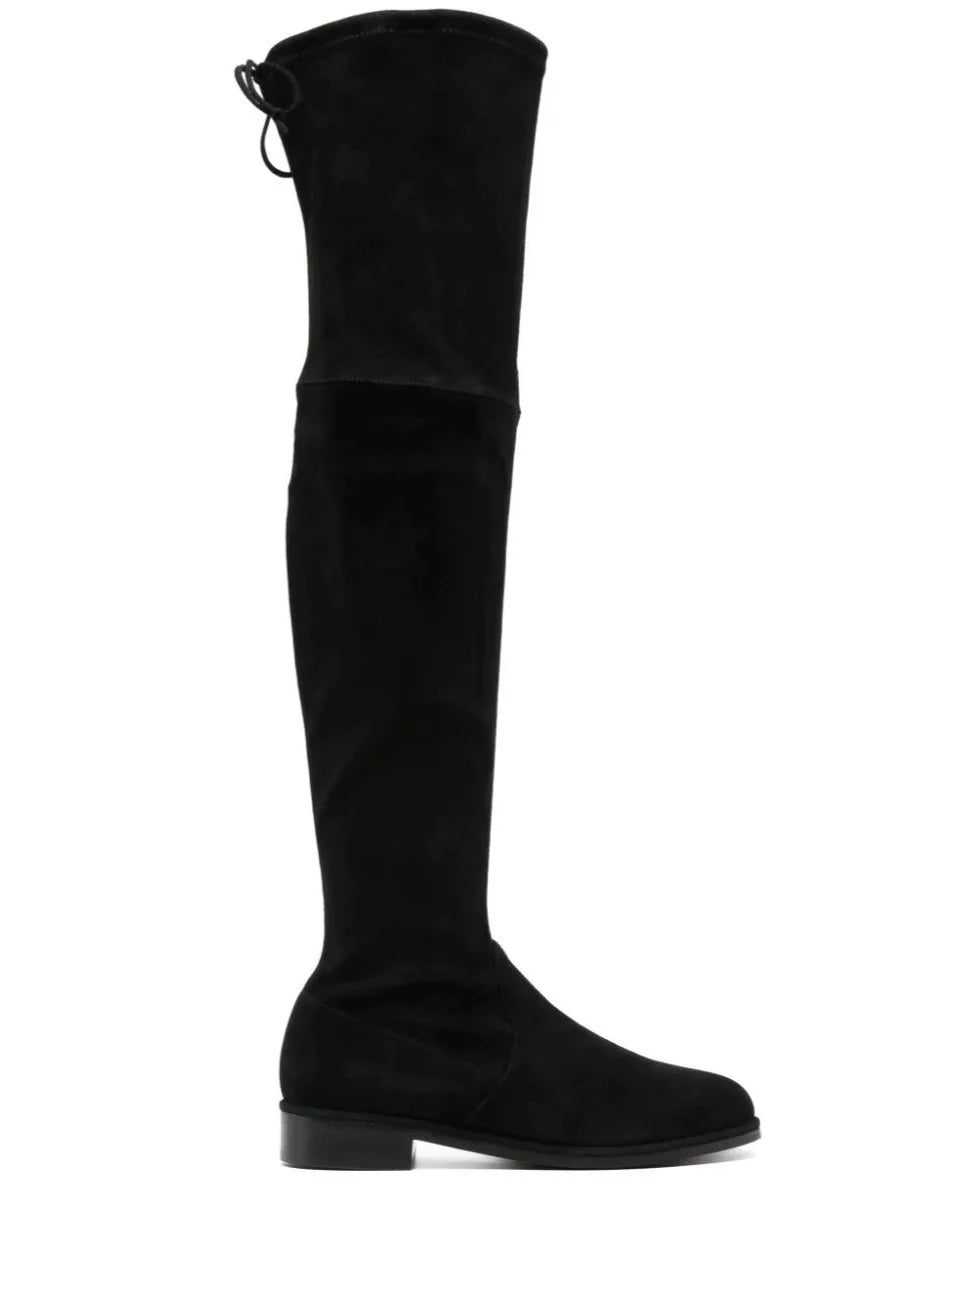 LOWLAND bold suede thigh-high boot, black